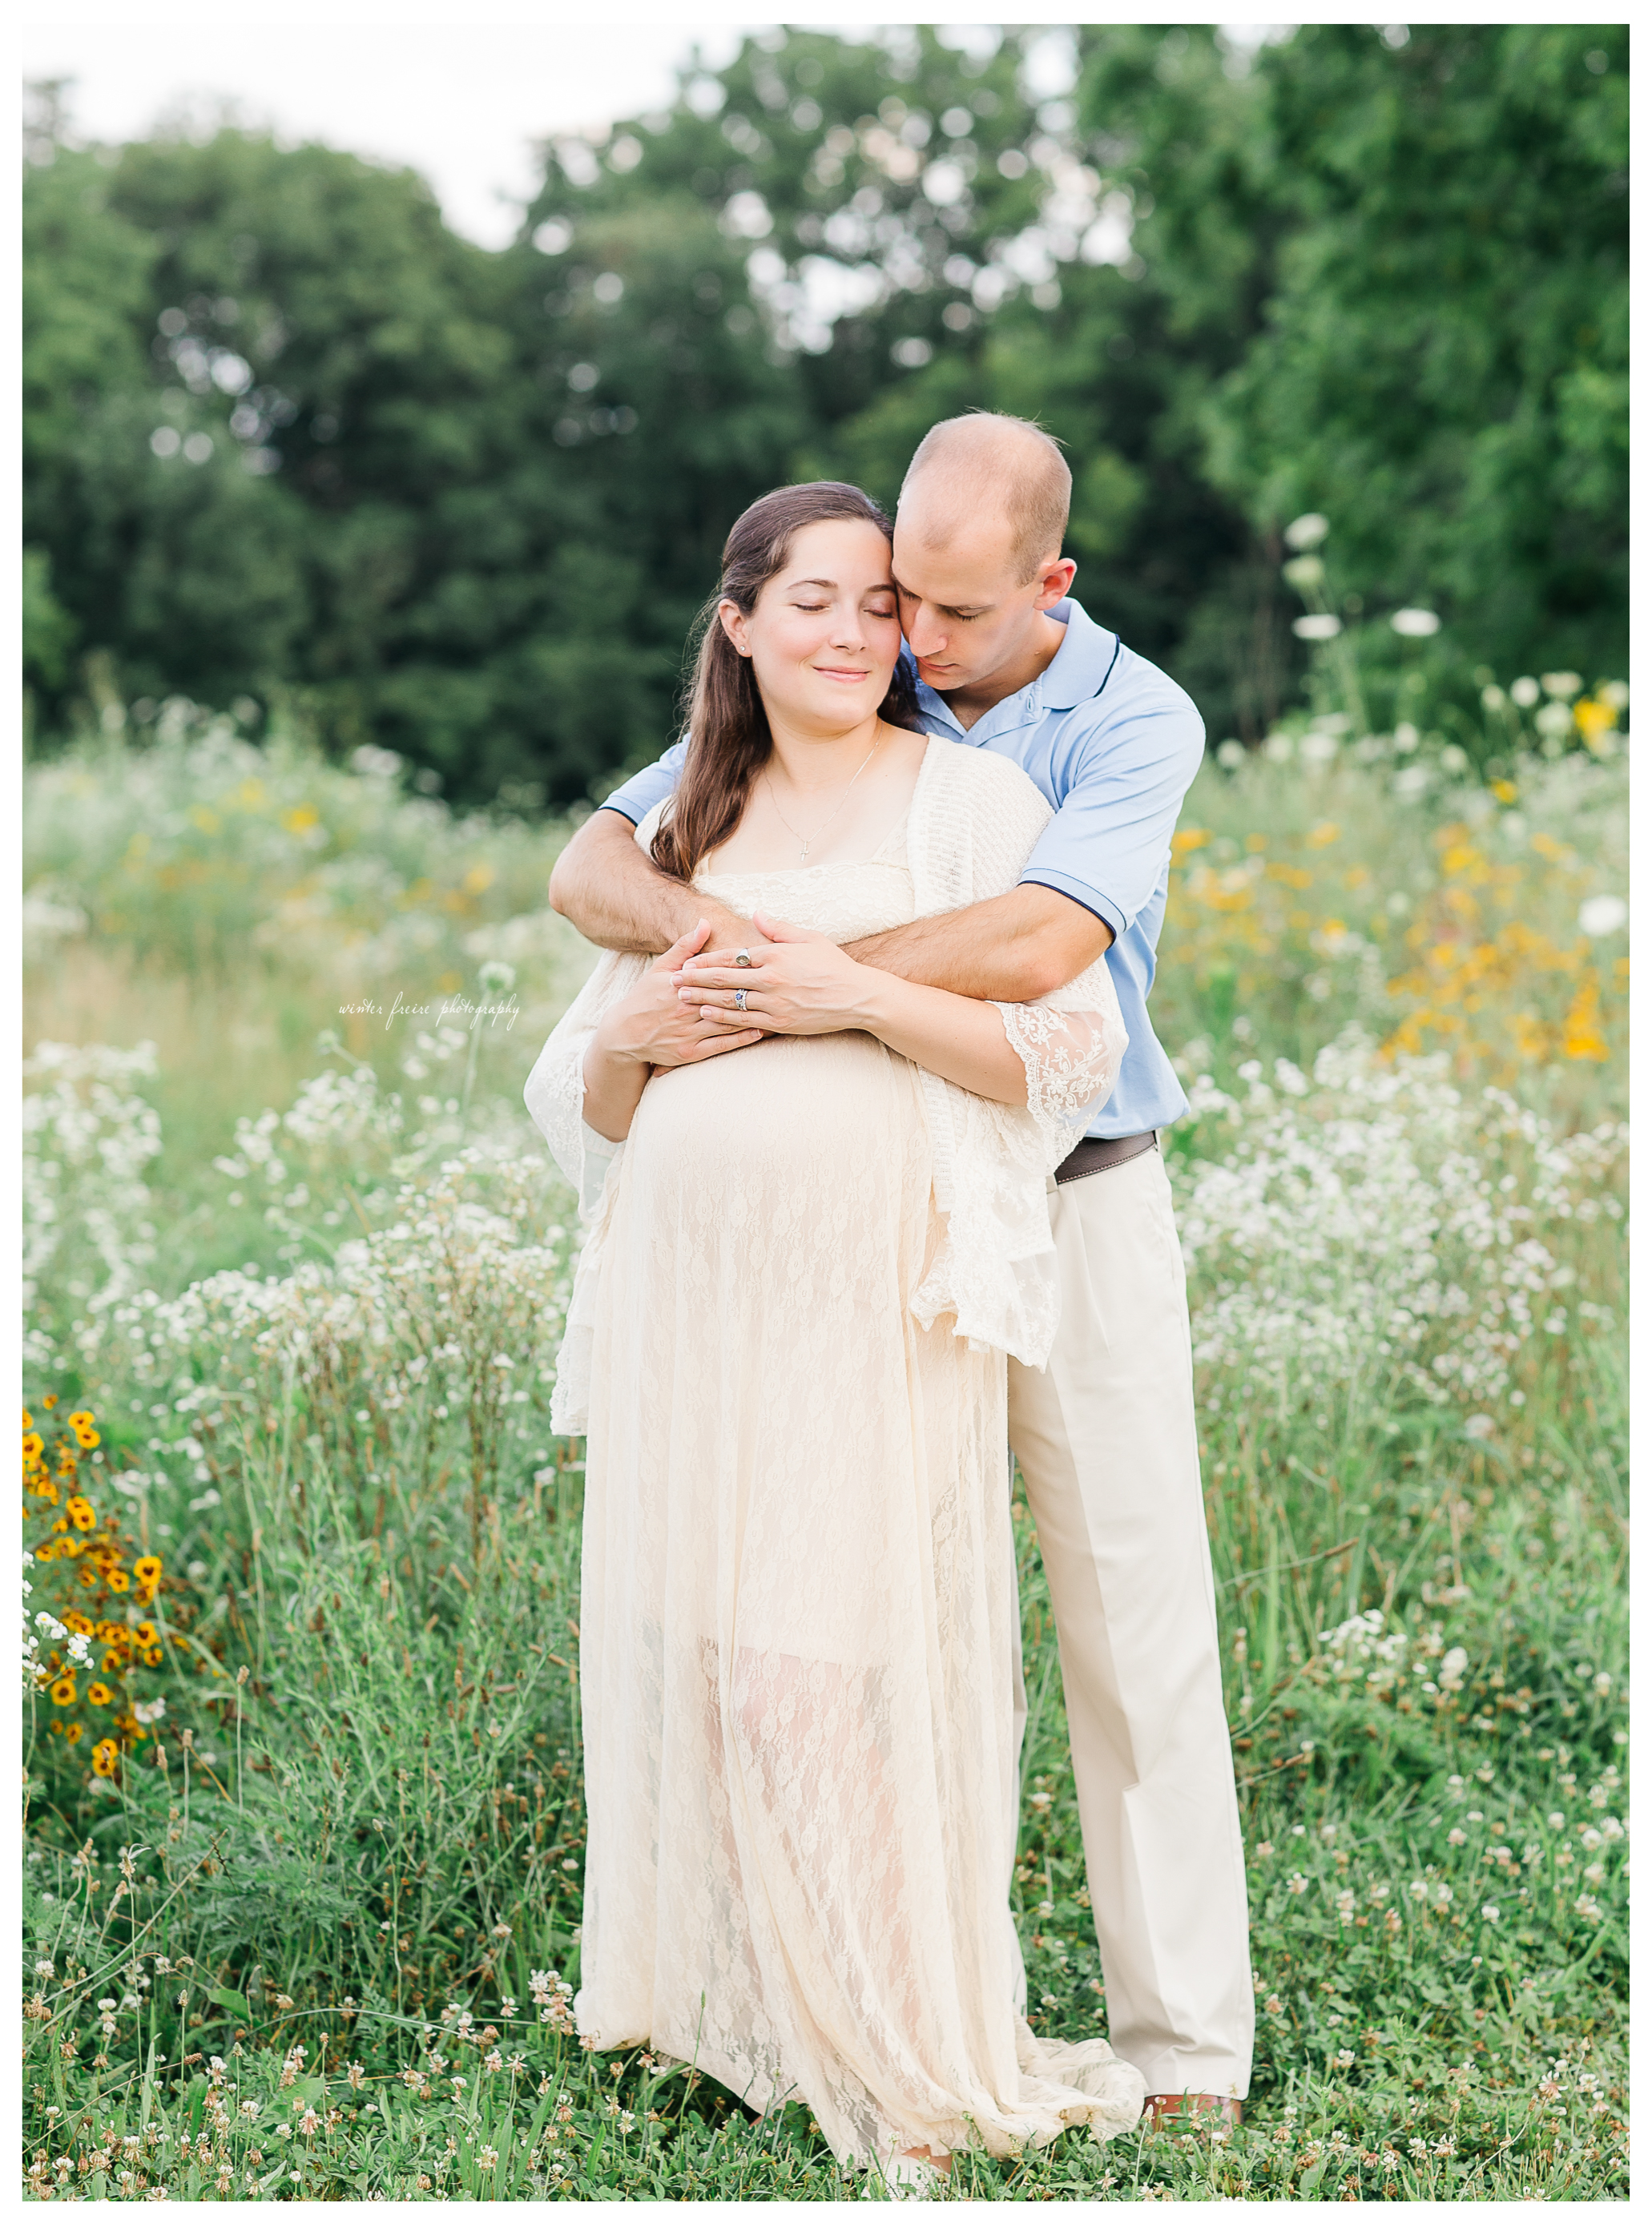 Winter Freire Photography | Sweet Pure Organic | Dayton, Ohio Maternity Photography | Dayton, Ohio Maternity Photographer | Motherhood | Maternity | Family Photographer | Family Photography | Dayton, Ohio Photographer | Dayton, Ohio Photography